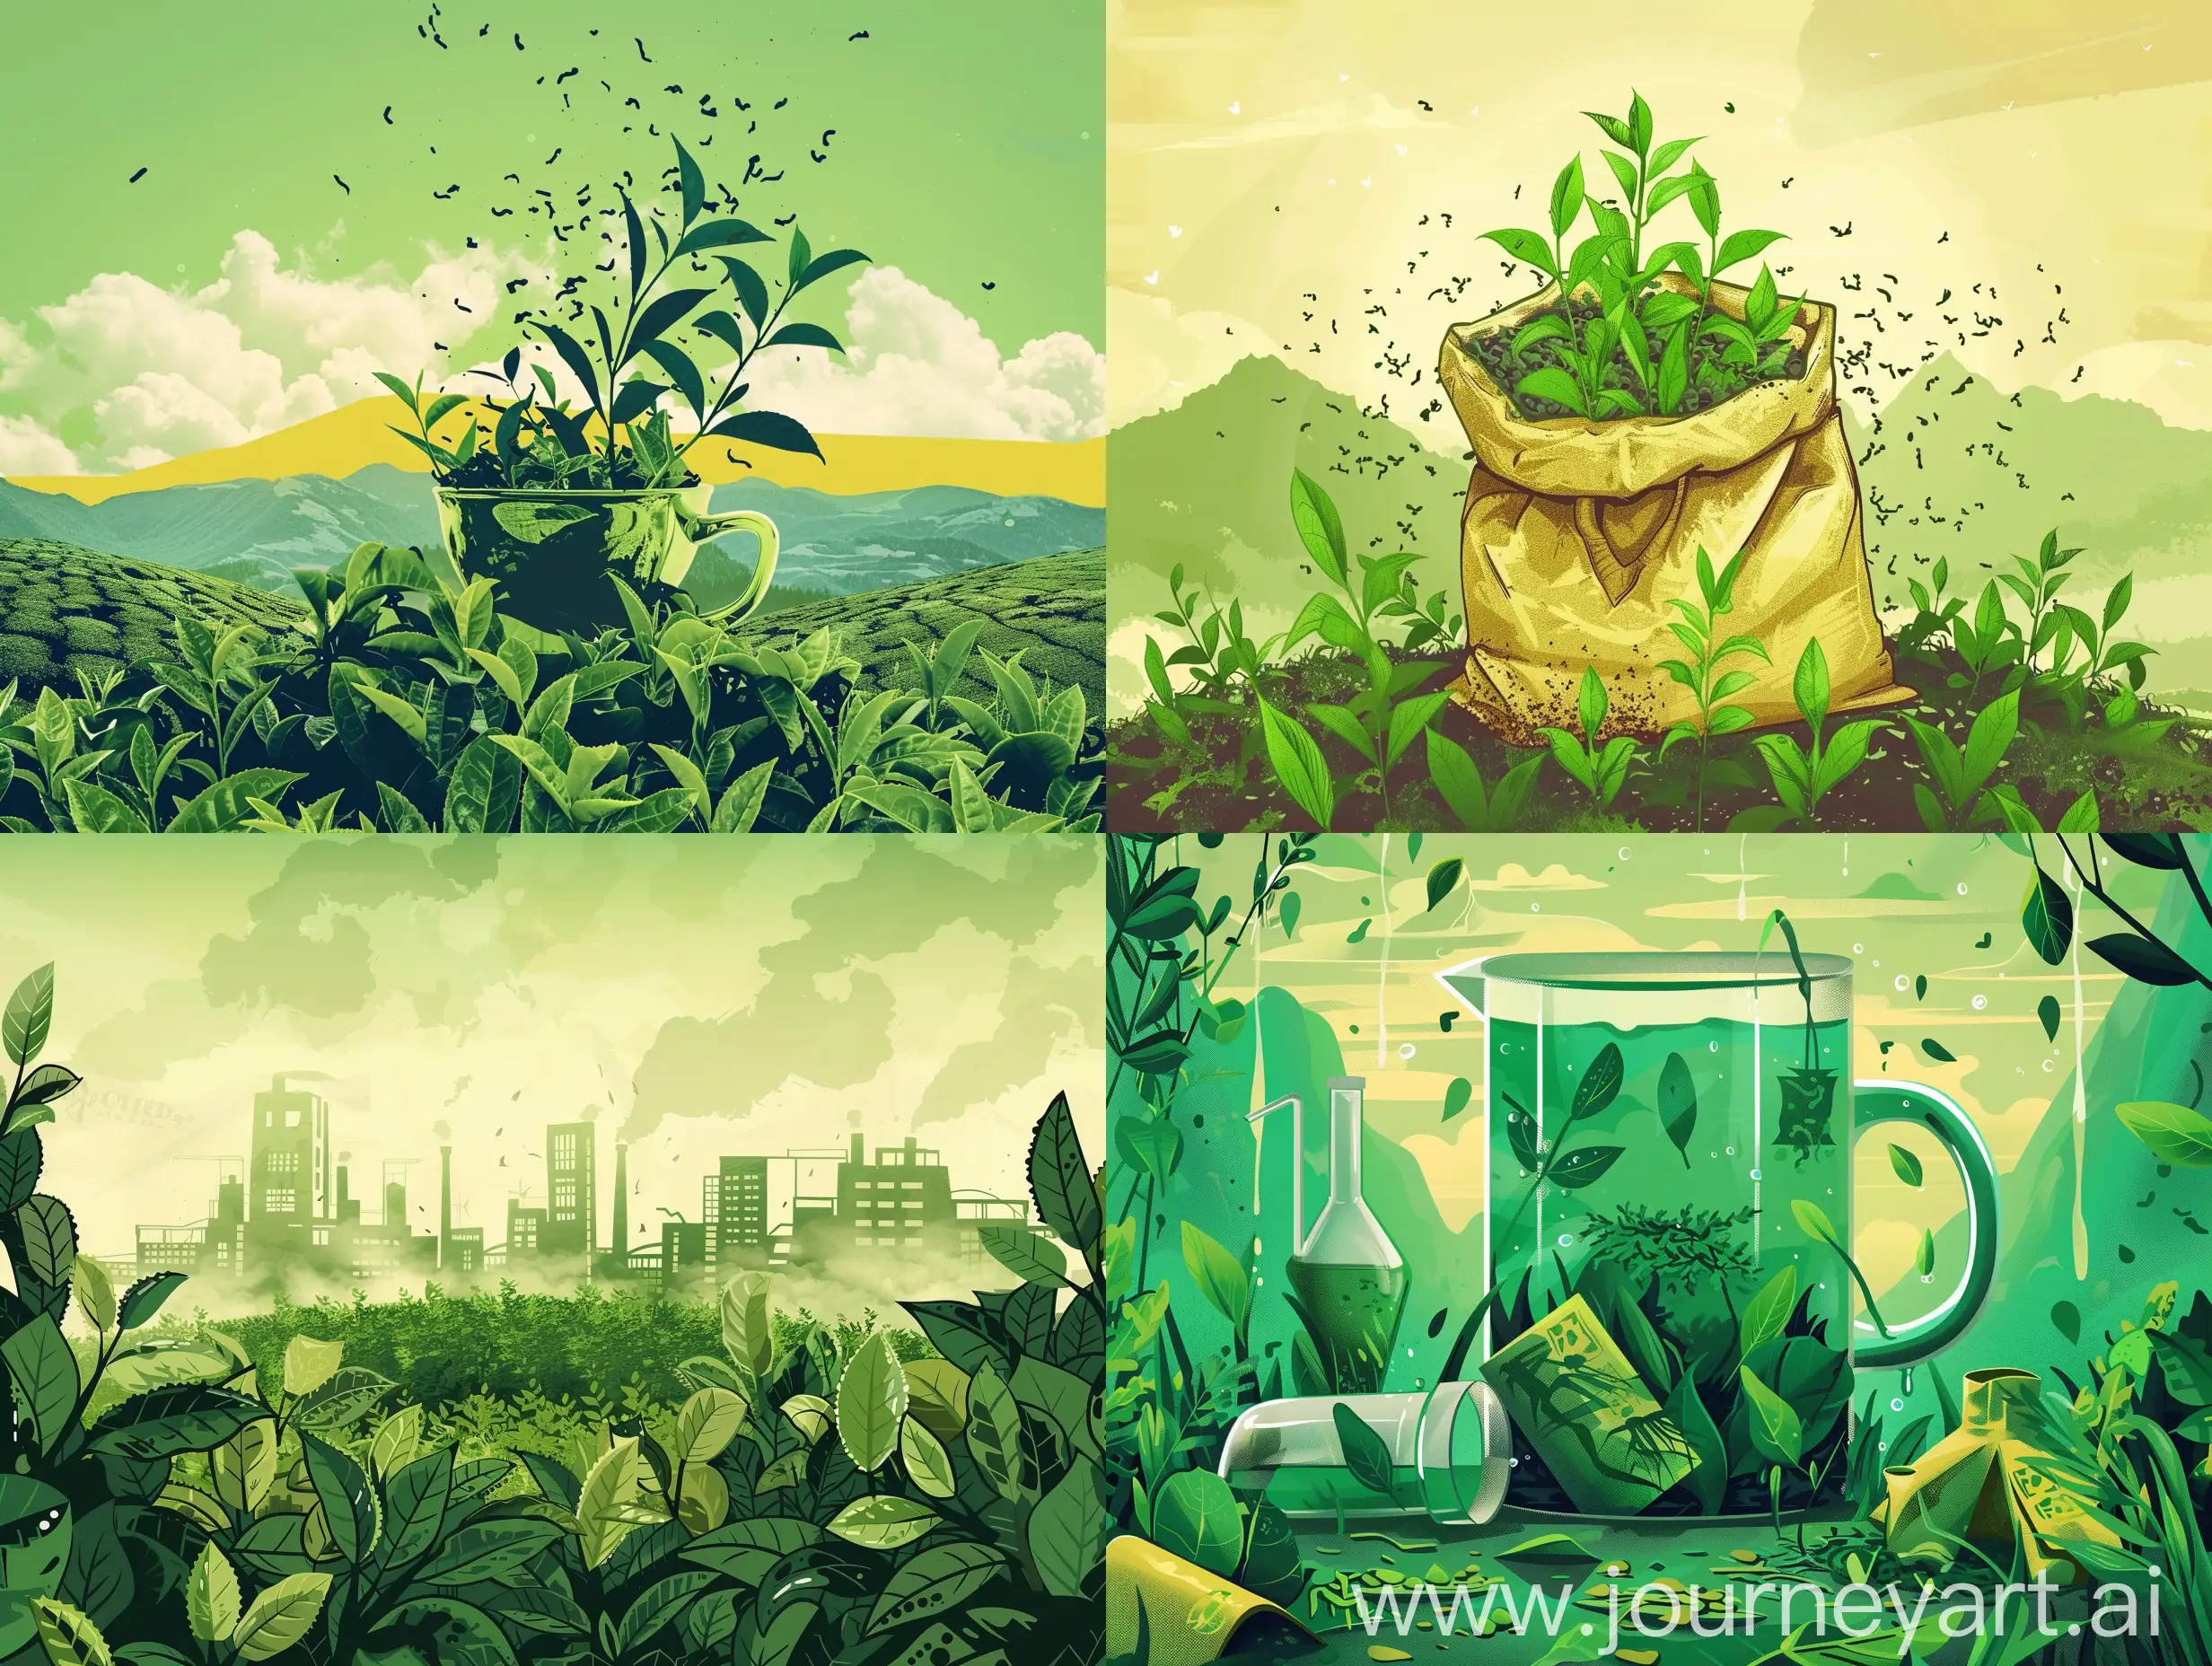 create a poster - satire on green tea industry and its harmful effects on the environment